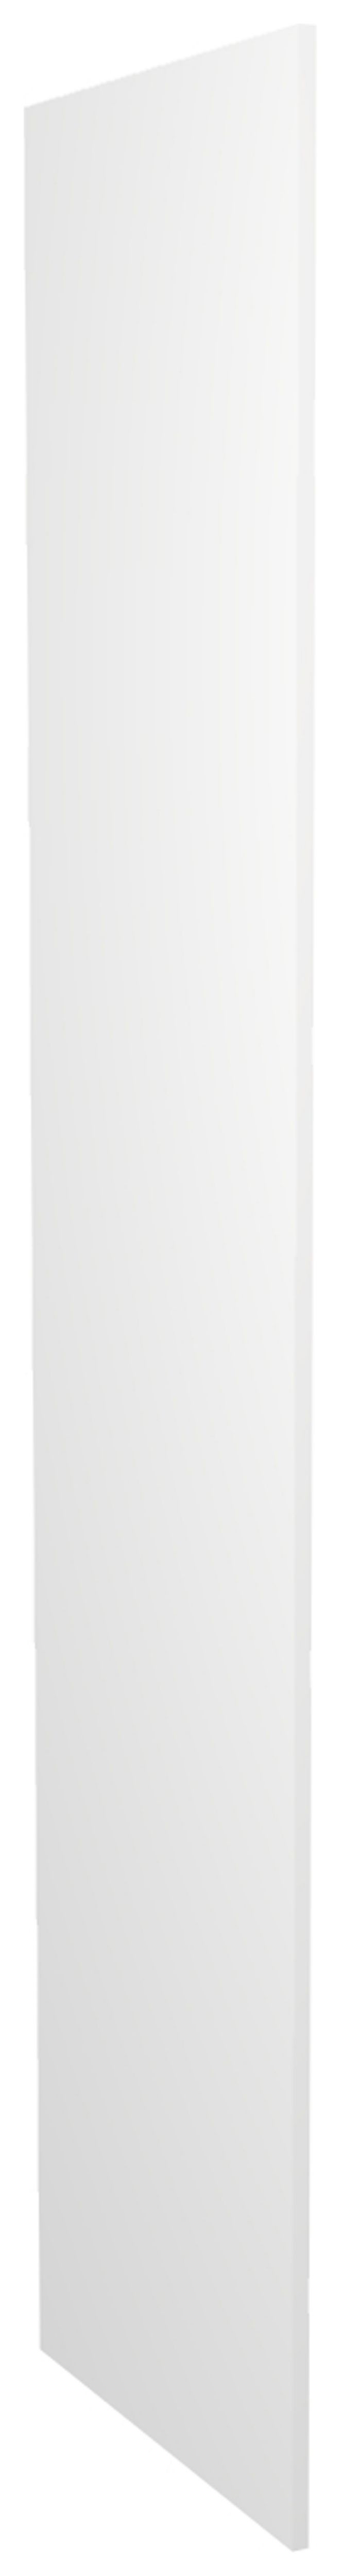 Image of Wickes Vienna Gloss White Tower Decor End Panel - 18mm